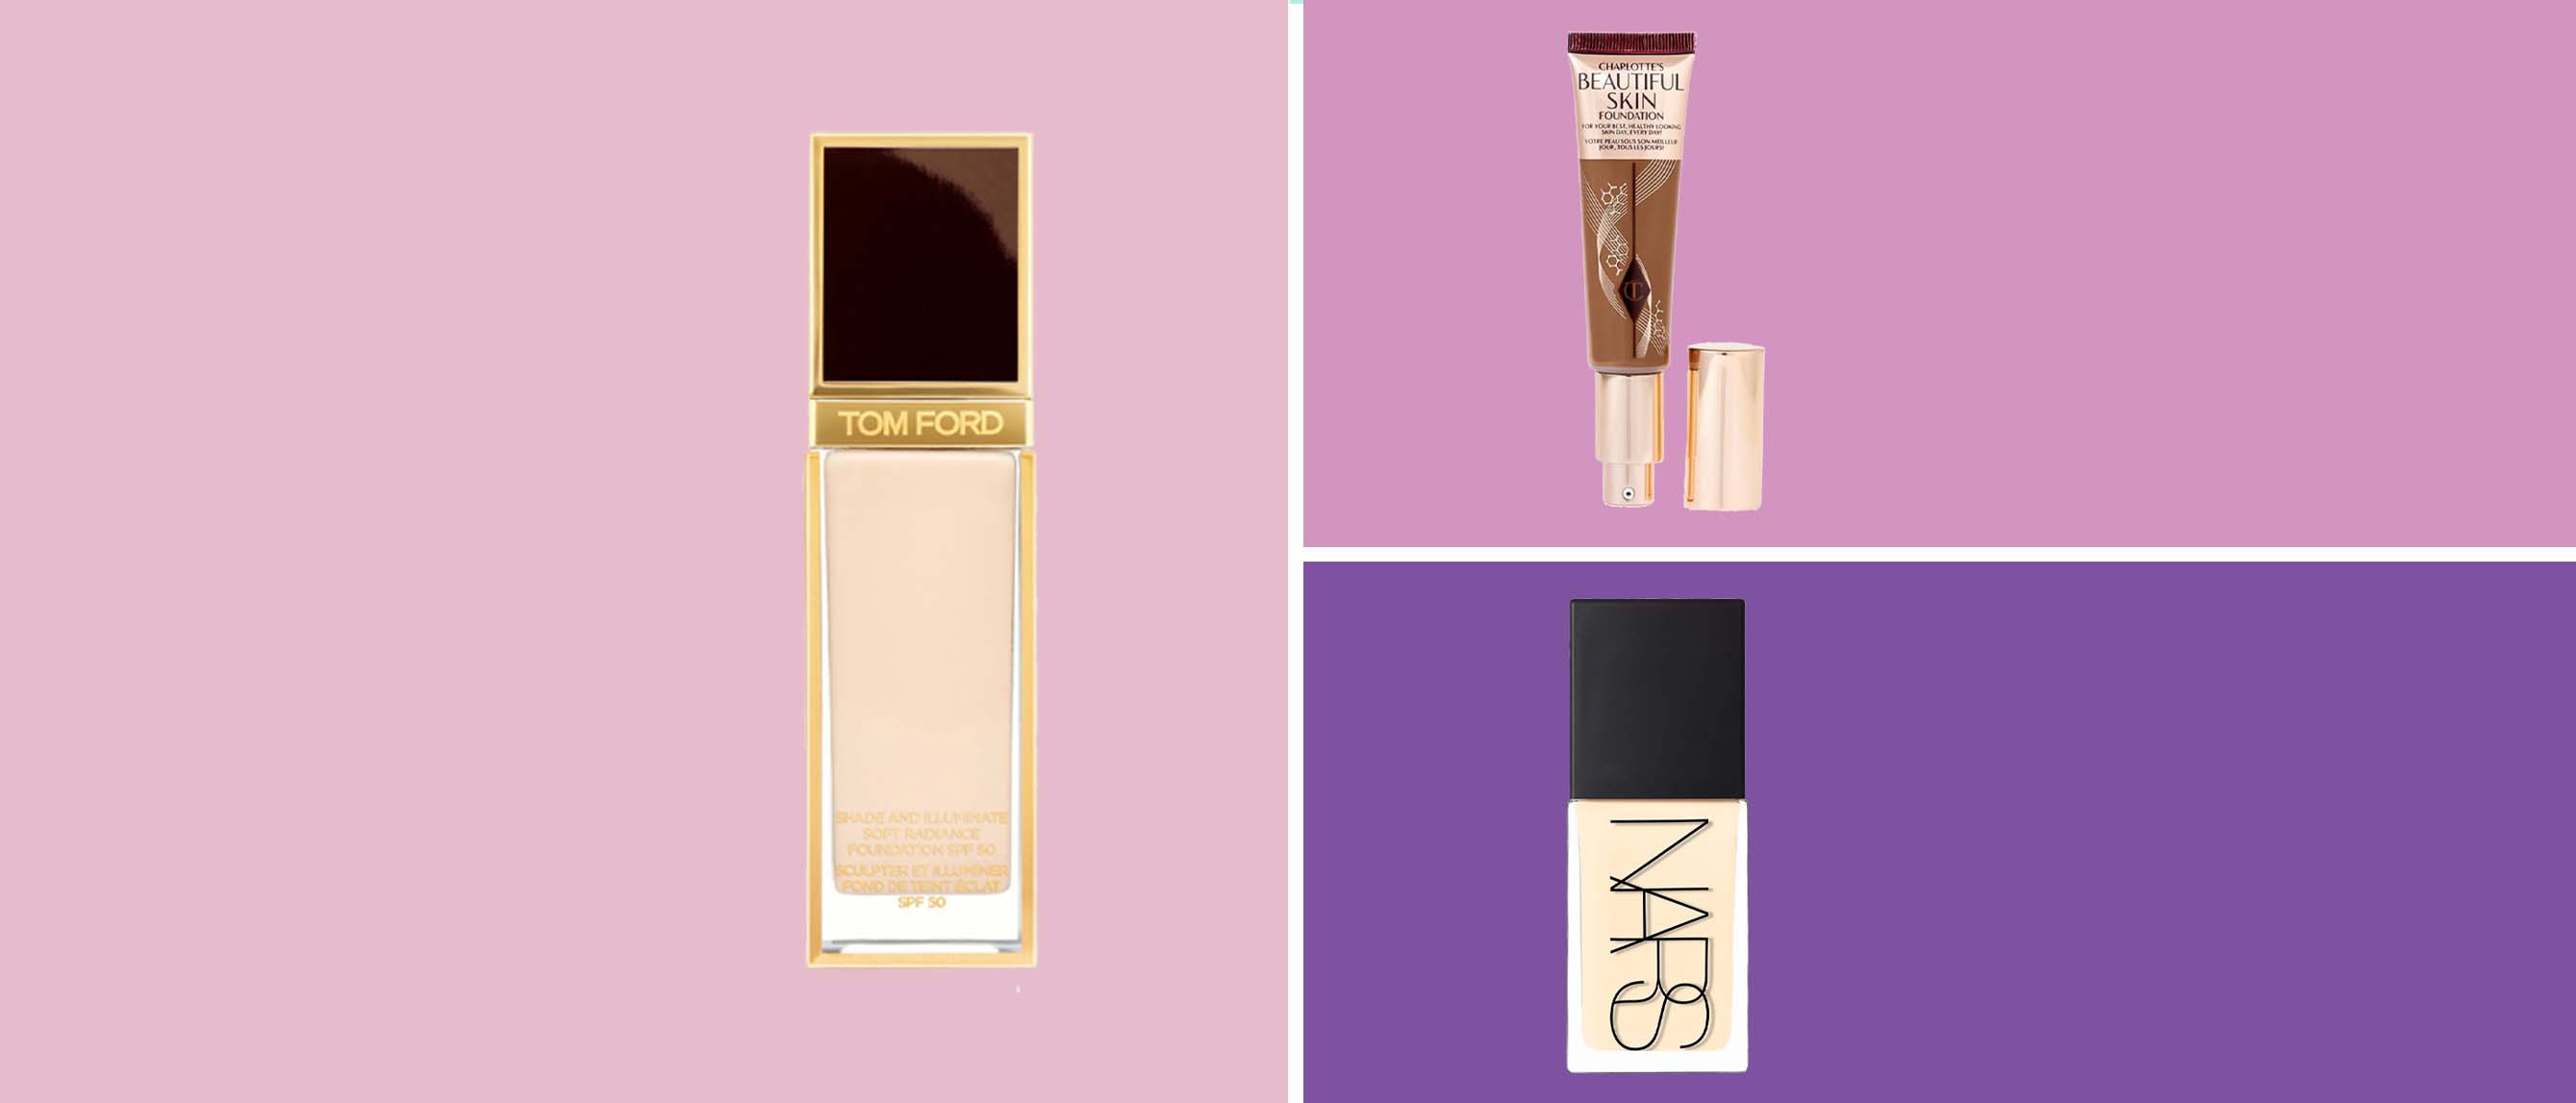 Boots shoppers love £2.99 Armani dupe foundation which 'leaves